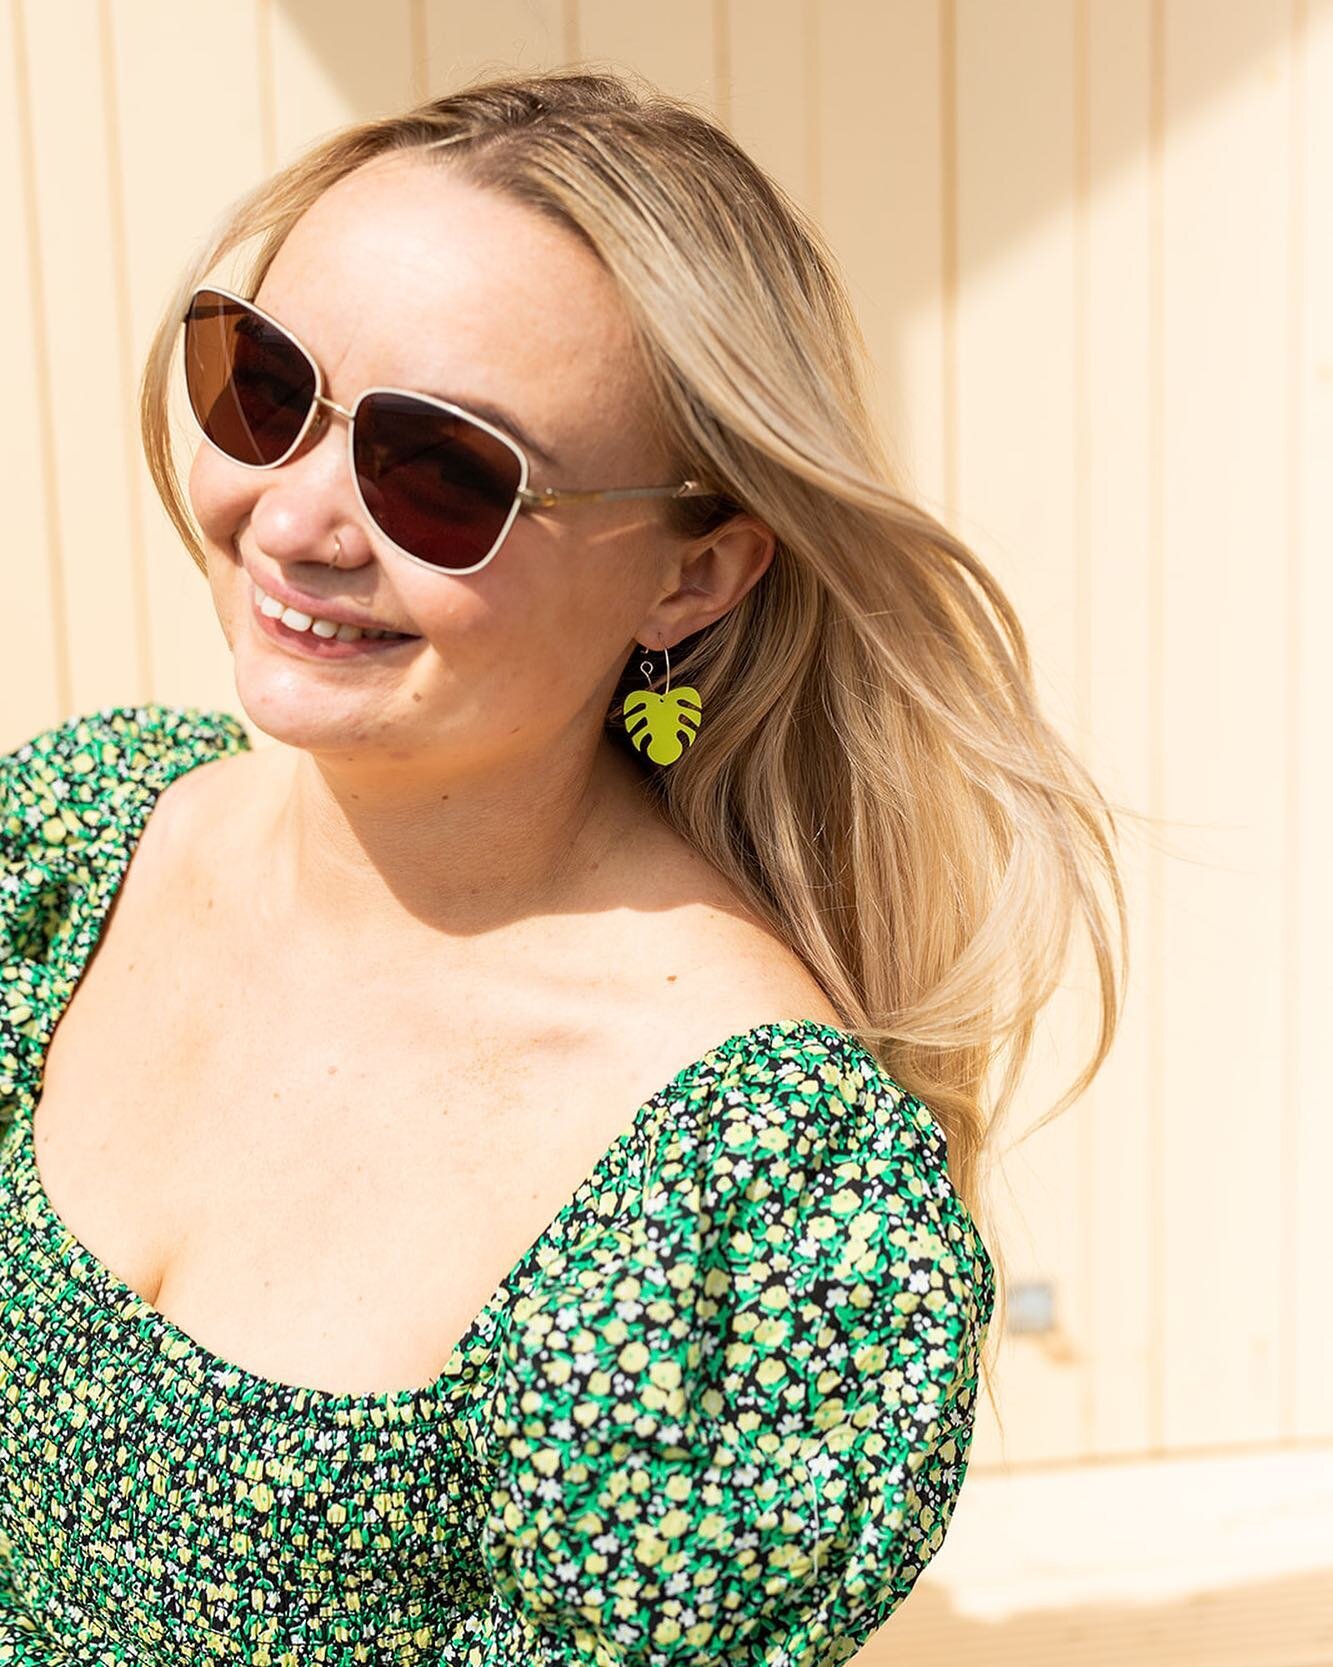 Making the most of sunglasses,  sundresses and summer brights statement earrings before snuggly jumpers and autumnal accessories creep in ☺️🥹
.
.
.
#summer #September #statementearrings #monstera #leaf #earrings #handmadejewellery #green #girlboss #